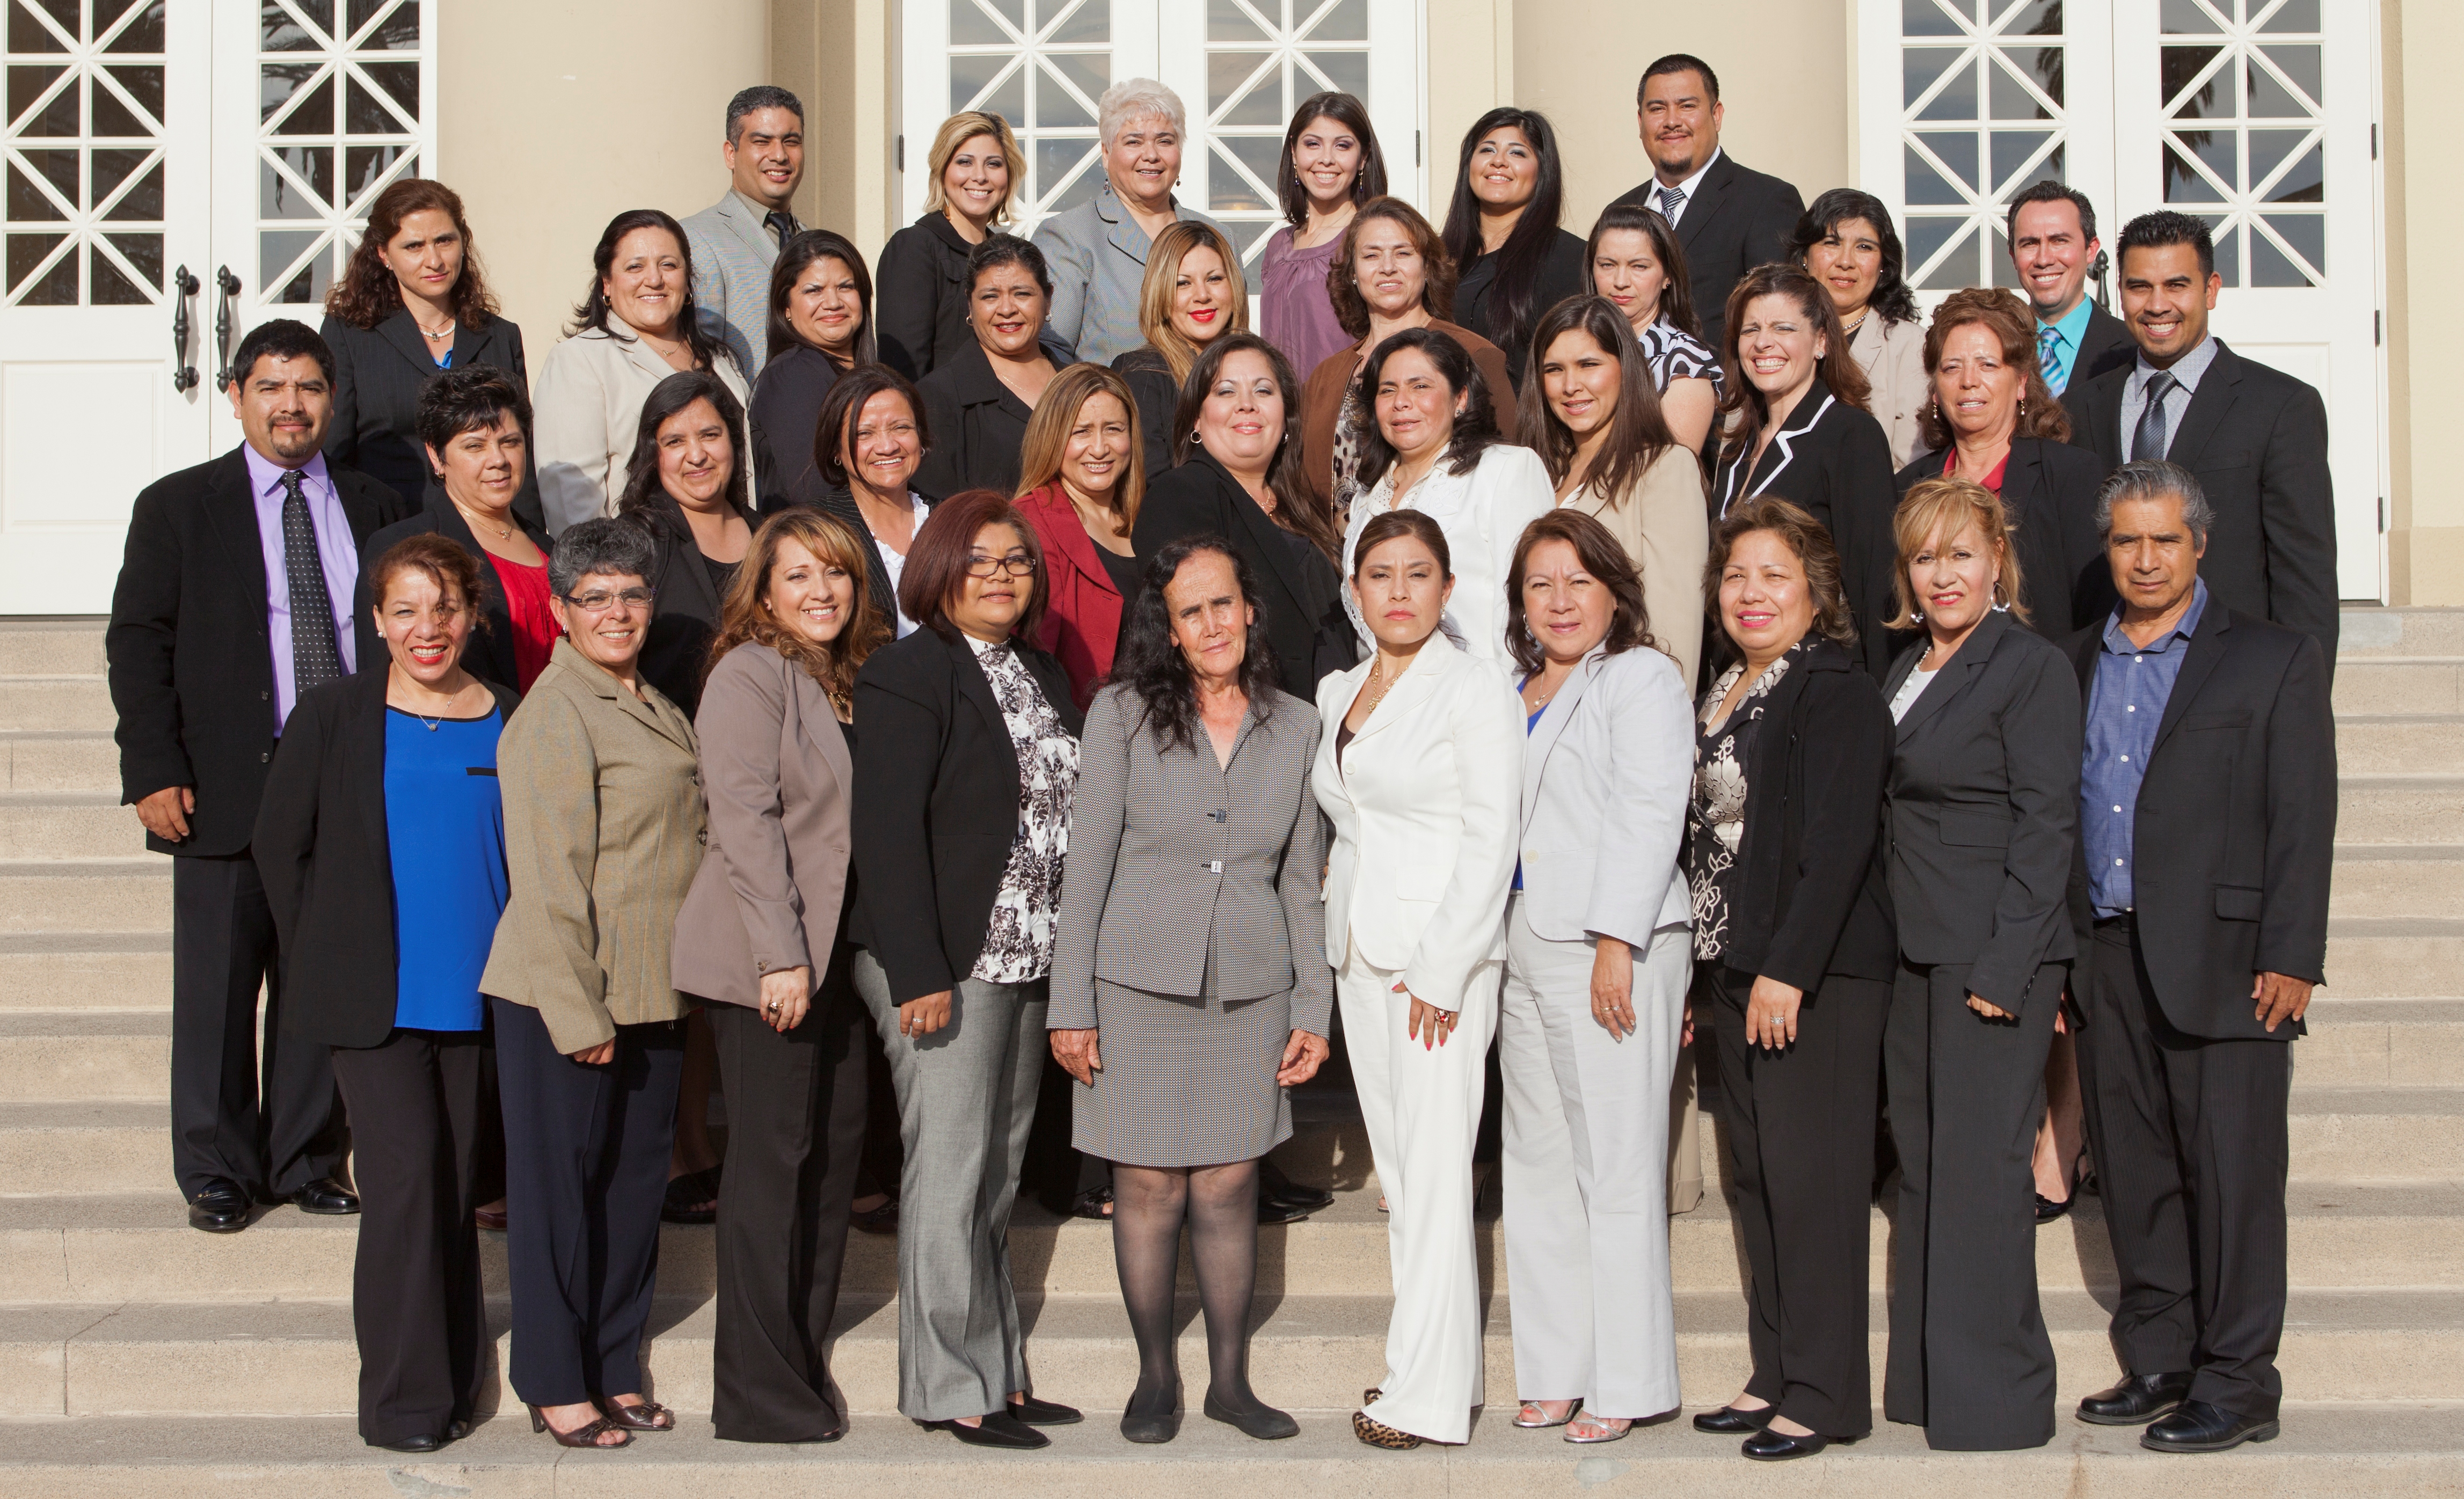 The first cohort of students to complete a two-year parent education course created in partnership with Padres Unidos and the College of Educational Studies will be honored at a special award ceremony Saturday, June 1.